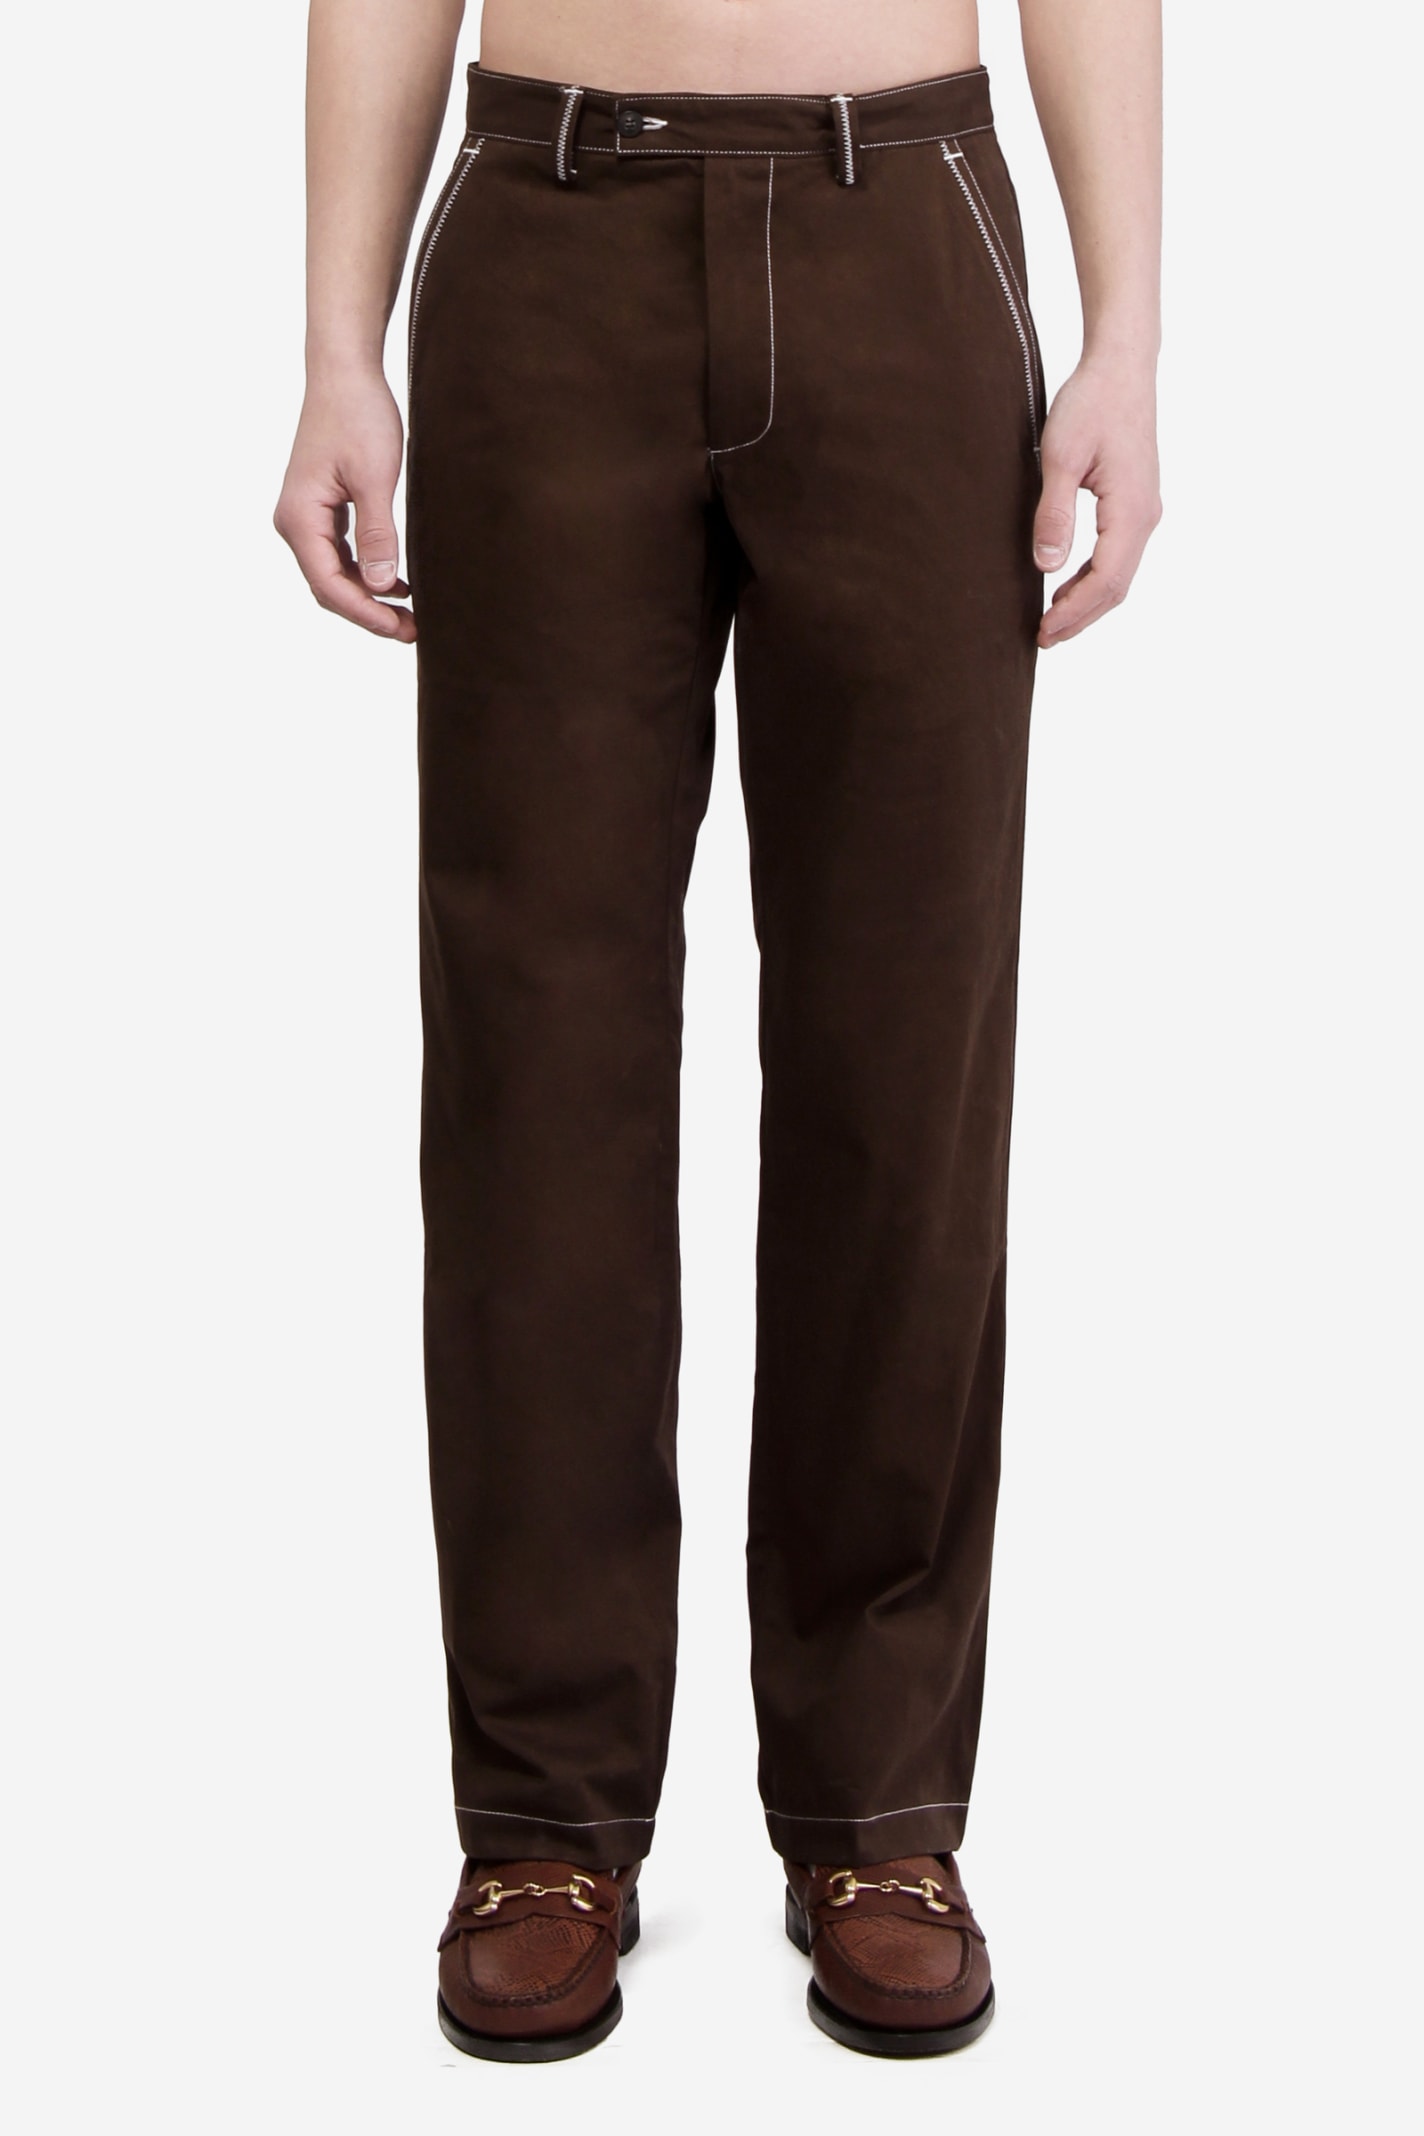 PHIPPS DAD trousers,PHSS21 P22